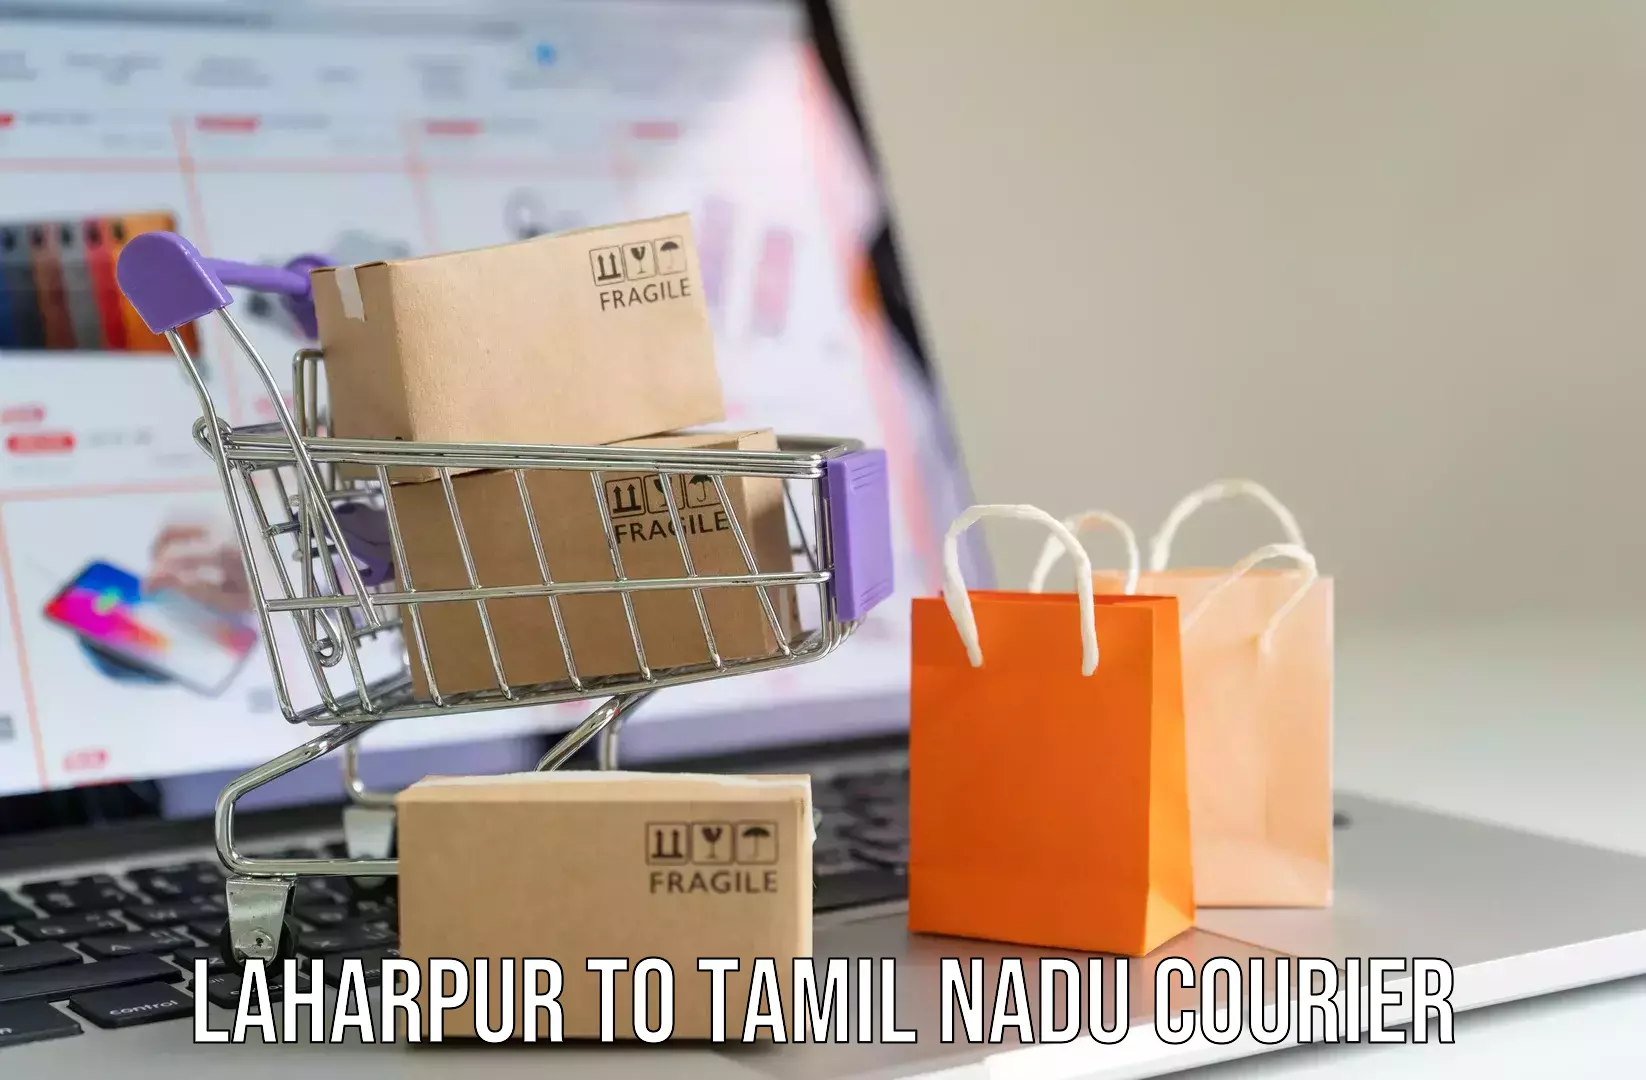 Personal effects shipping in Laharpur to Tamil Nadu